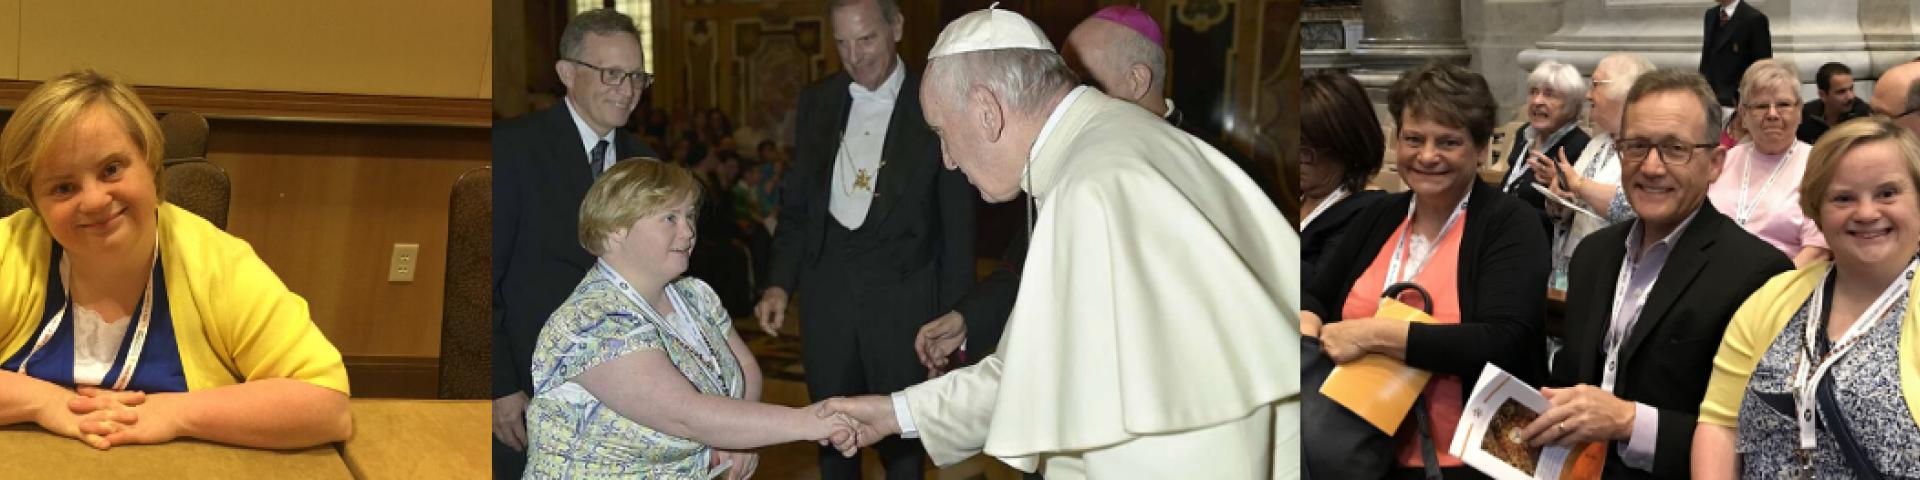 Bridget Brown with her family and Pope Francis